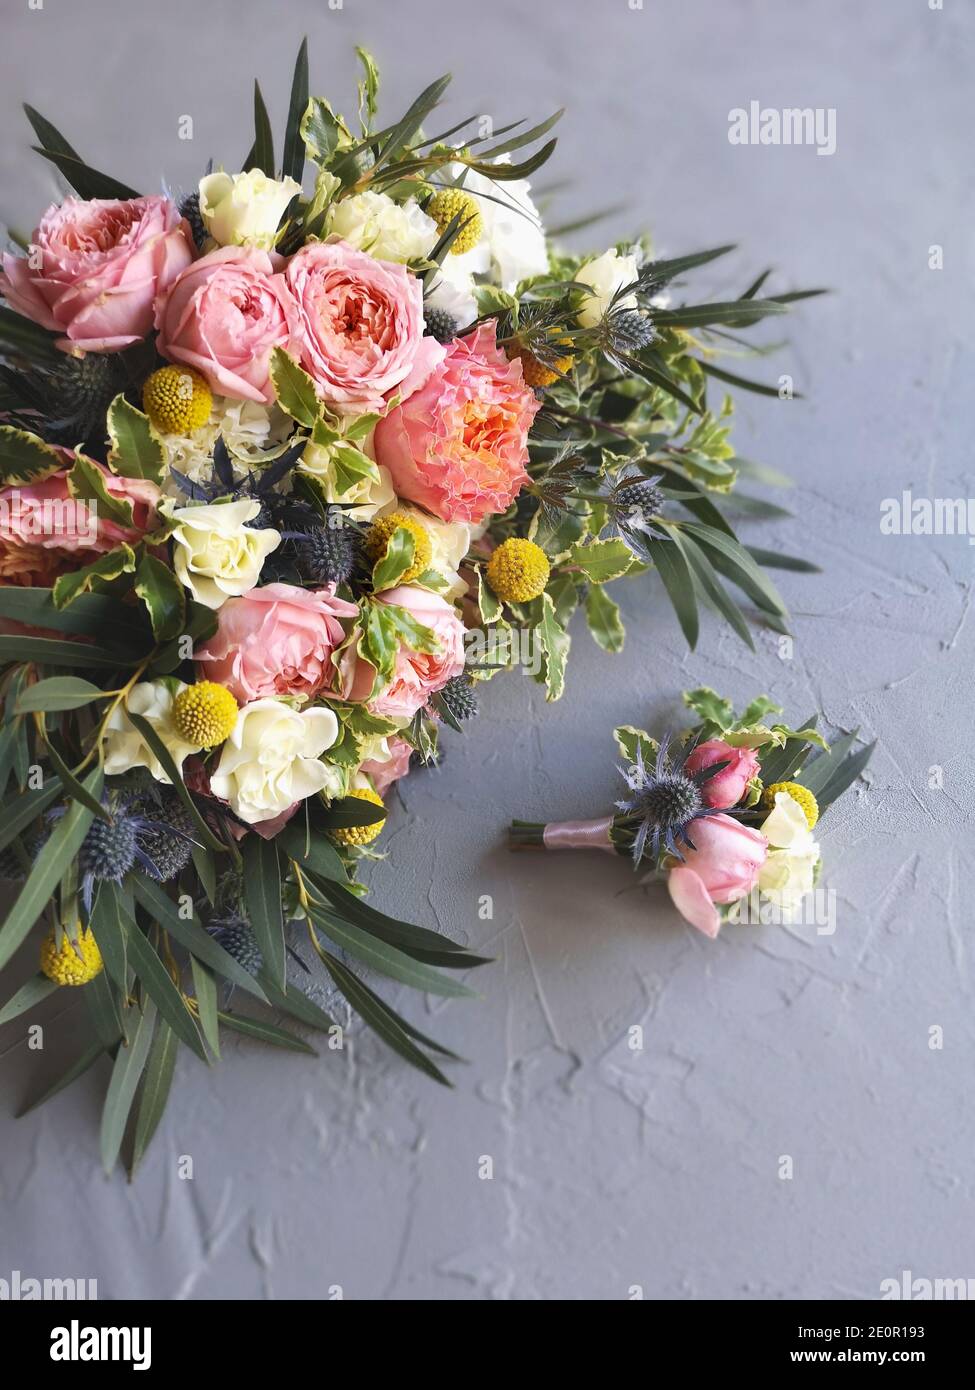 bride's bouquet of pink, white and yellow flowers and groom's boutonniere on gray florist table. Top view, flatlay slyle. English garden Spray roses Stock Photo